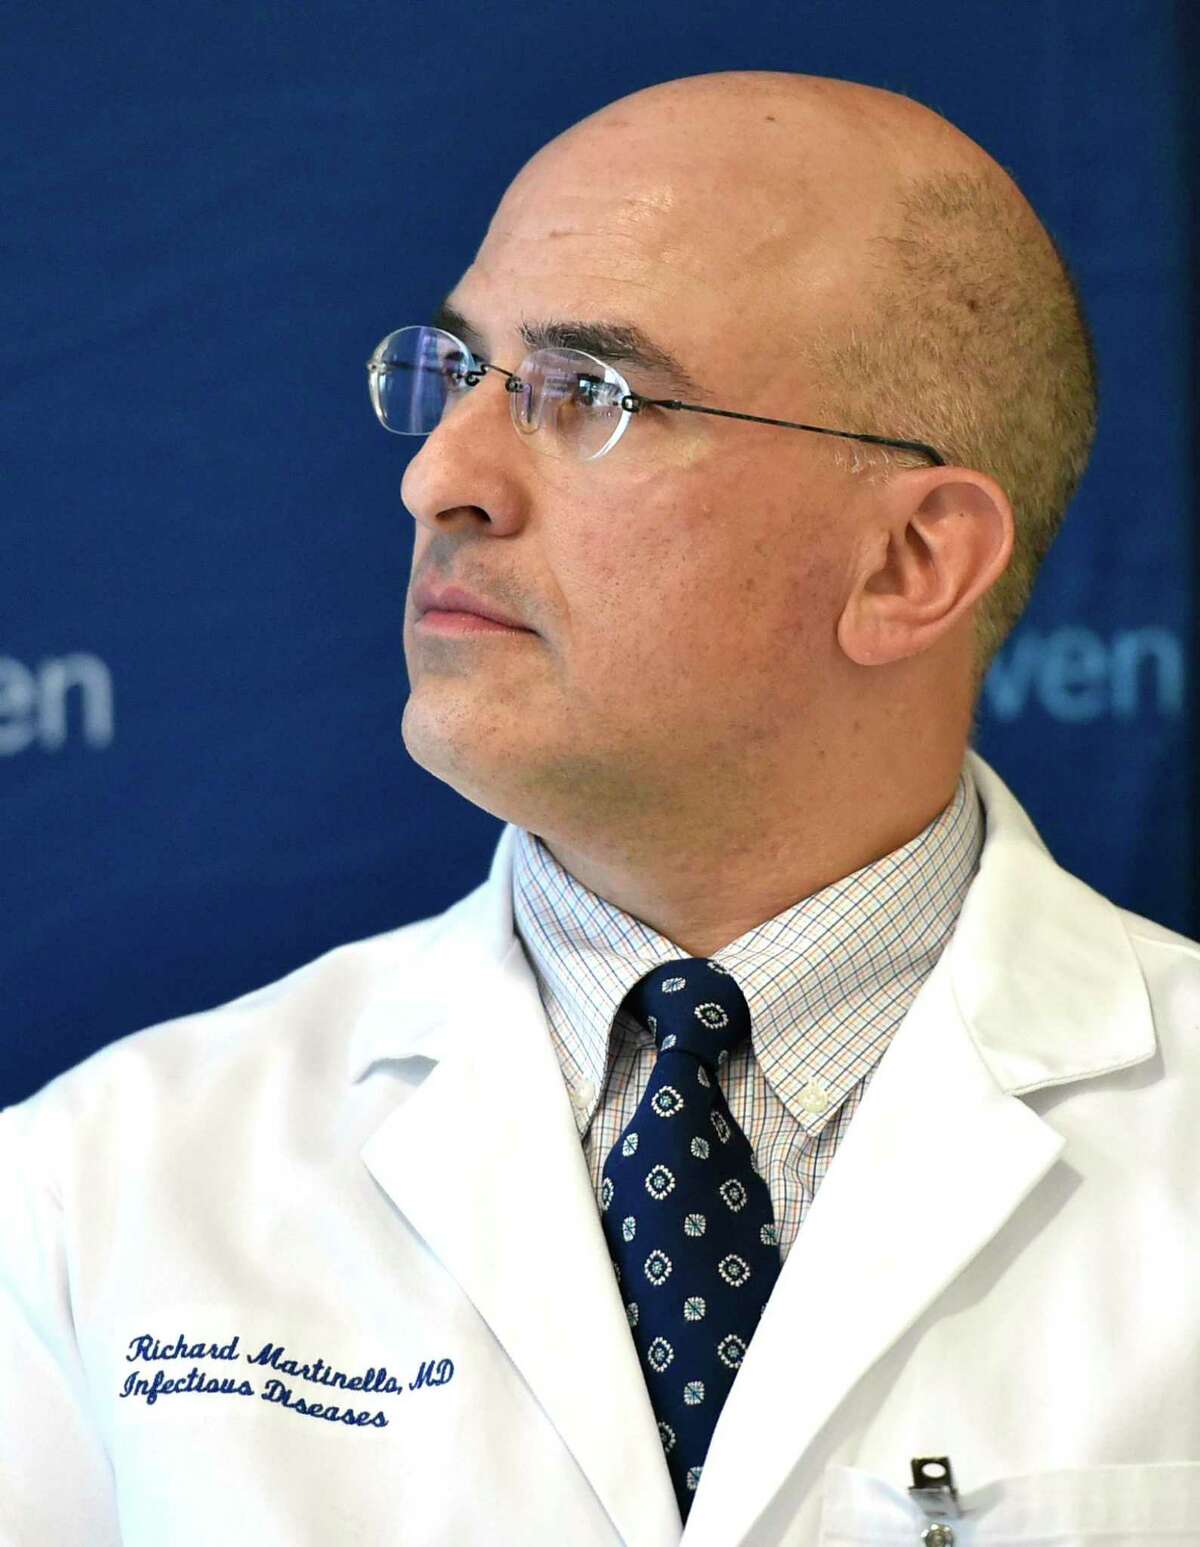 Dr. Richard Martinello, Yale New Haven Health's medical director for infection prevention, 2020.